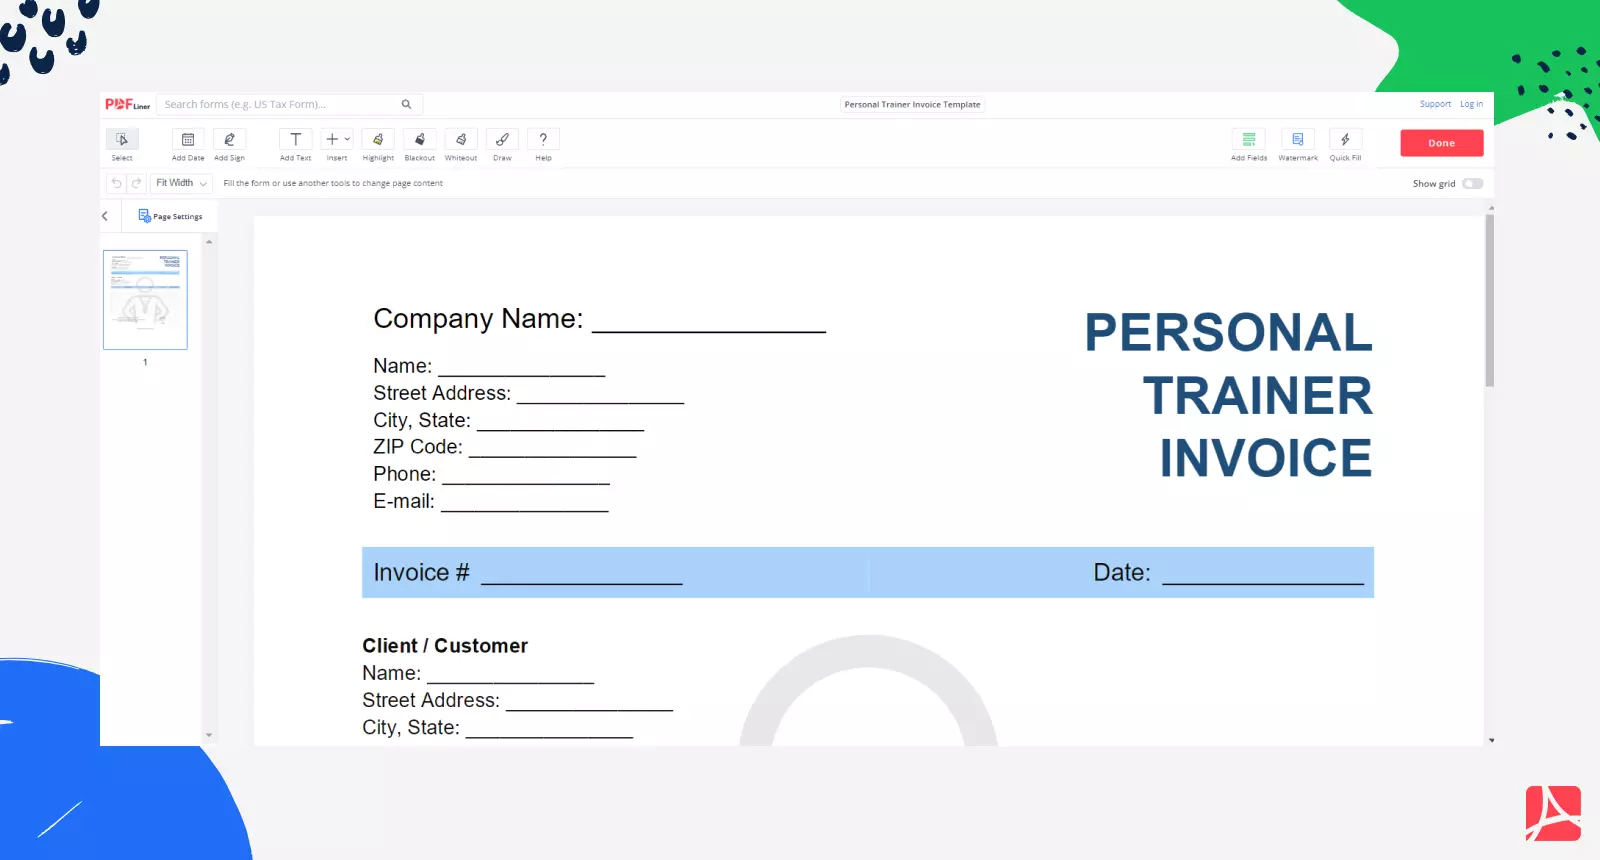 Personal Trainer Invoice Template on PDFLiner